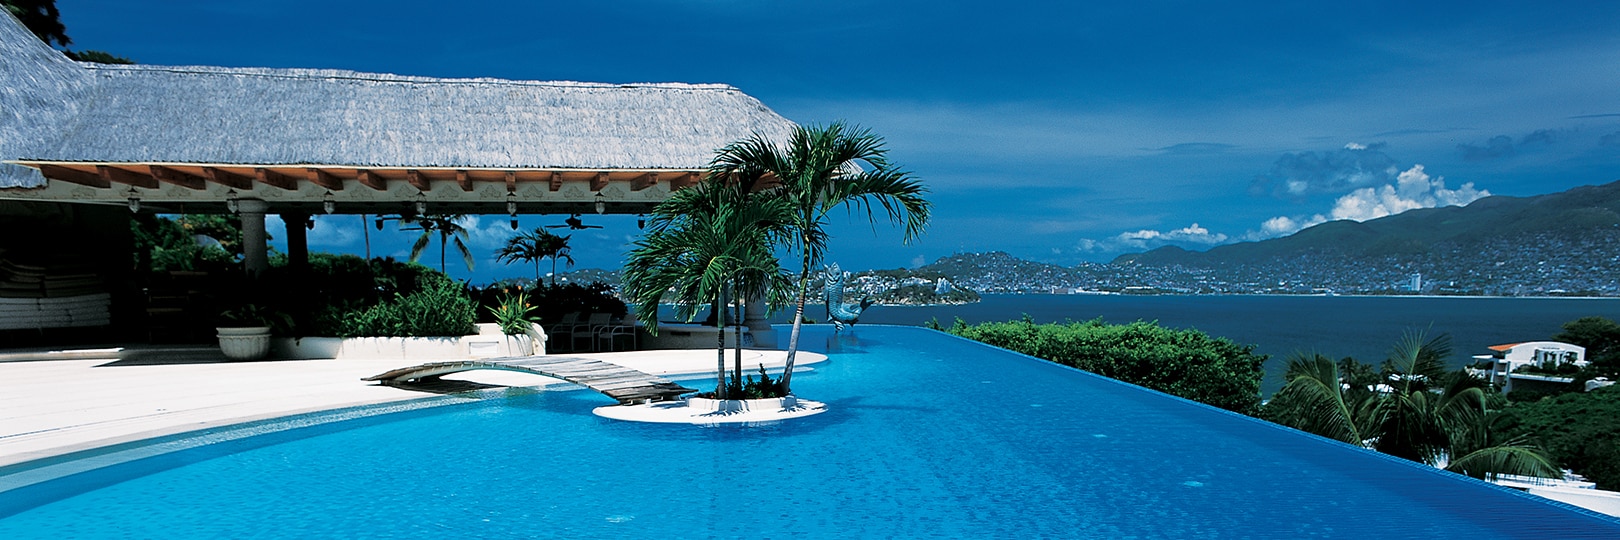 Infinity pool with white and blue tile, wood bridge to swim-up island with palm trees, patio with thatched roof, ocean view with mountains in the background.